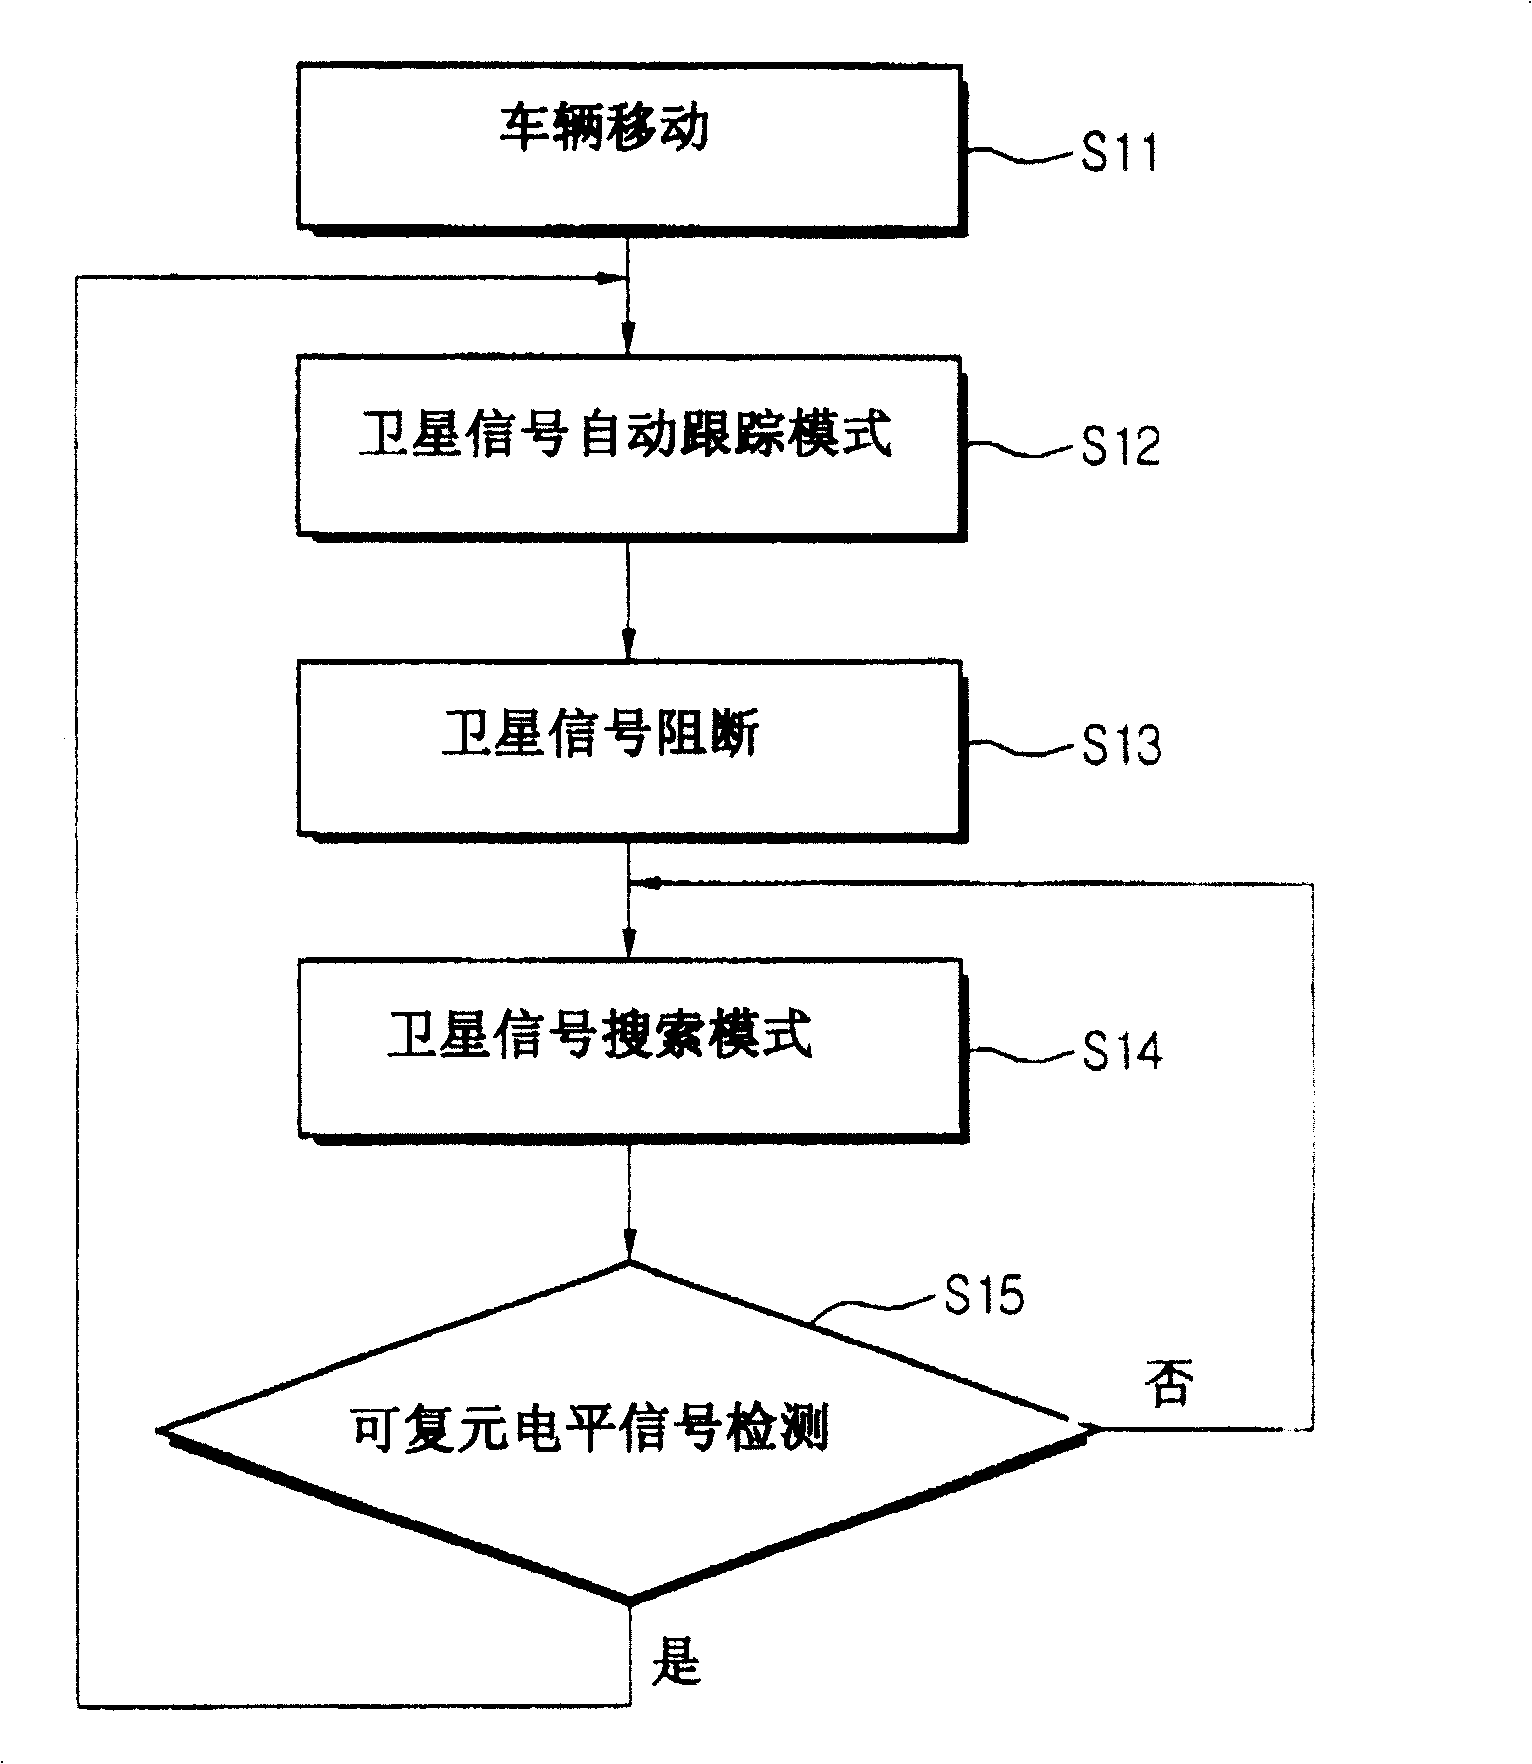 Method for controlling mobile satellite tracking antenna system